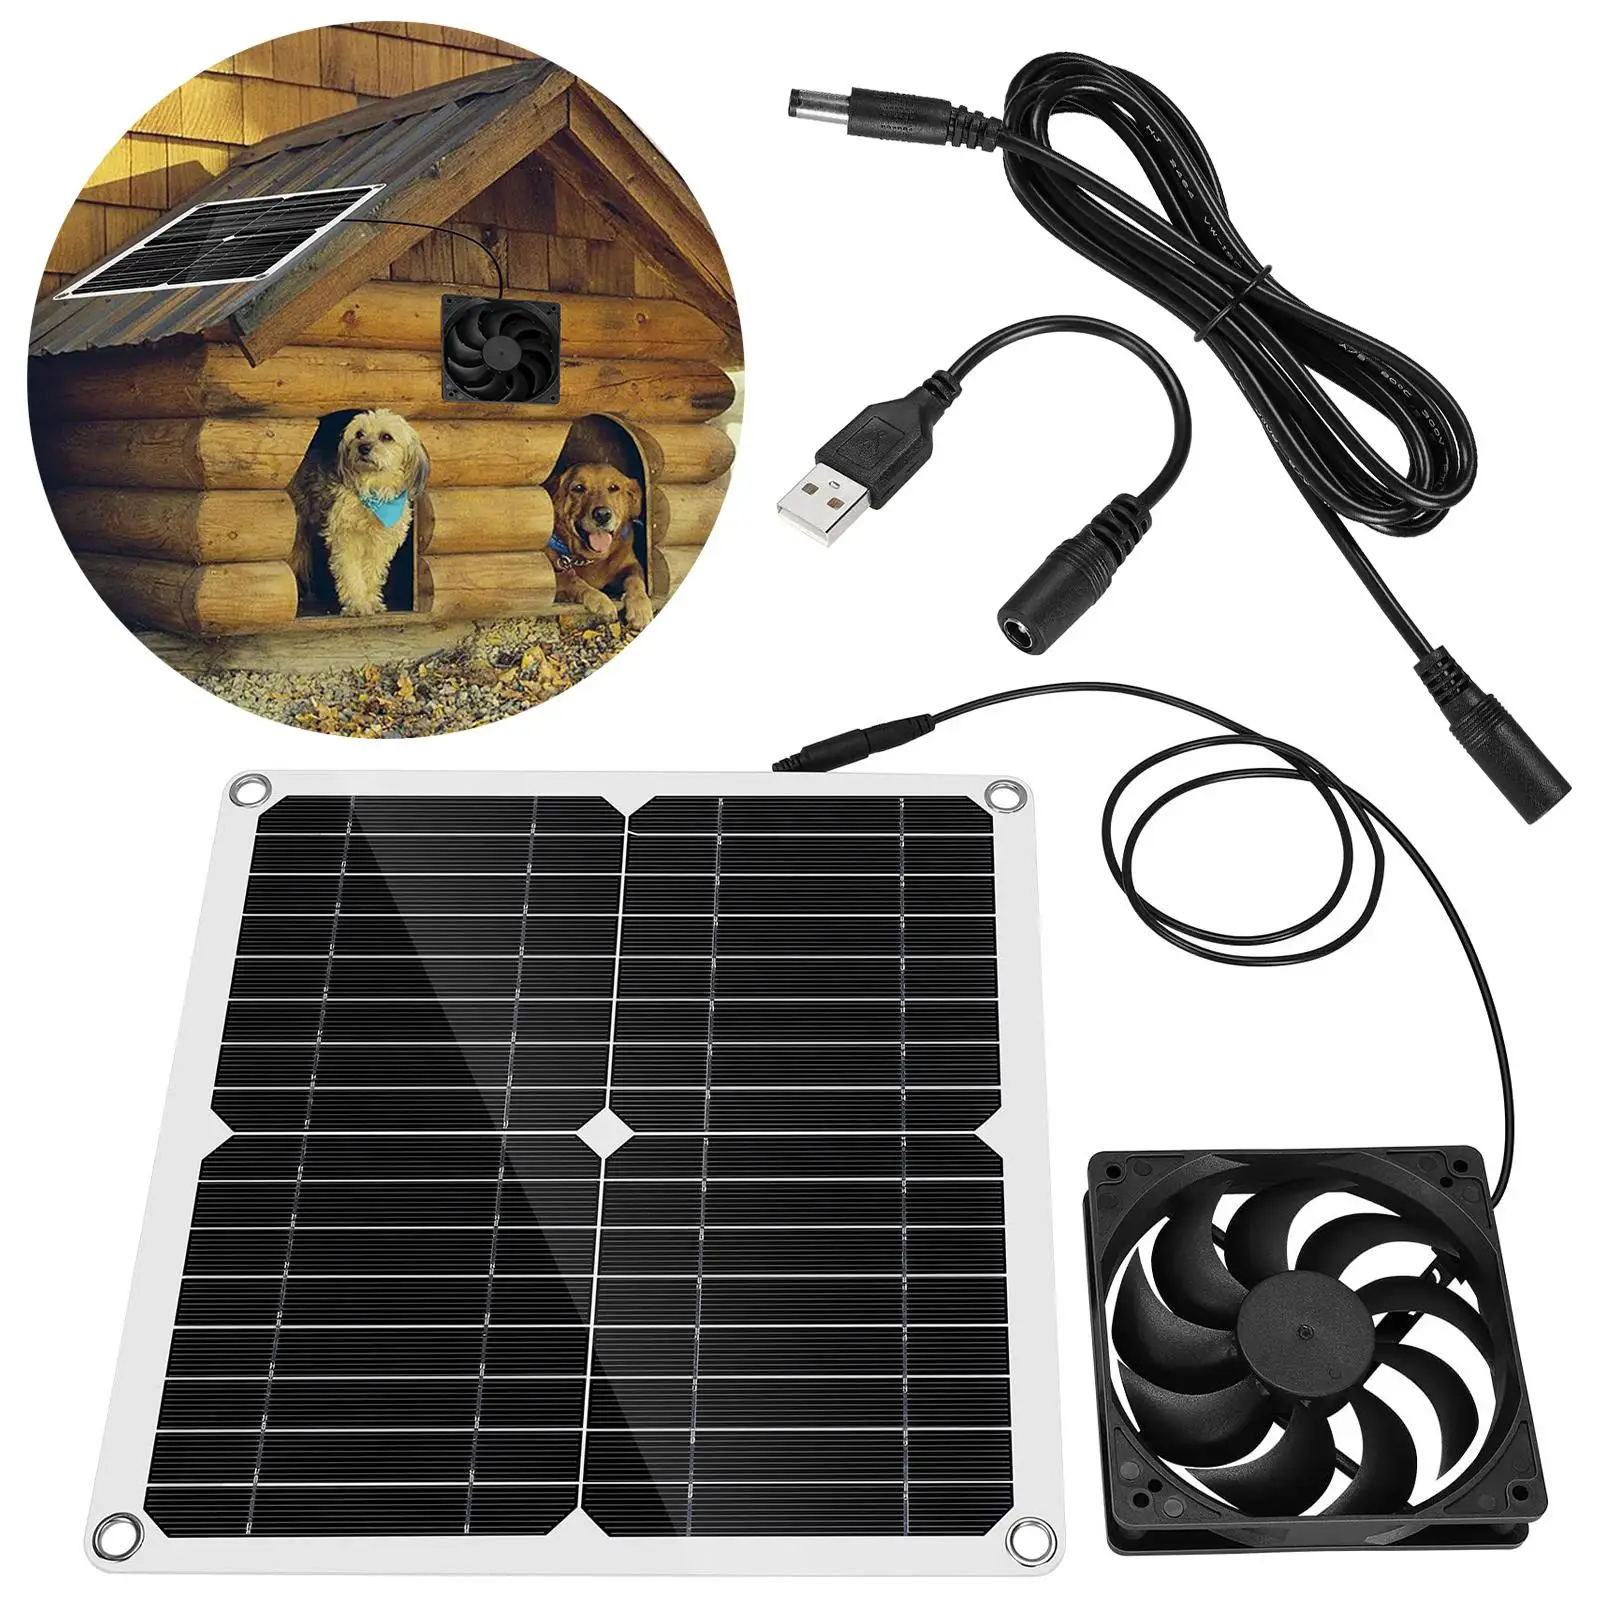 12W Solar Exhaust Fan Outdoor Air Extractor Portable 12V Mini Ventilator for Greenhouse Rvs Office Chicken House Phone Charger